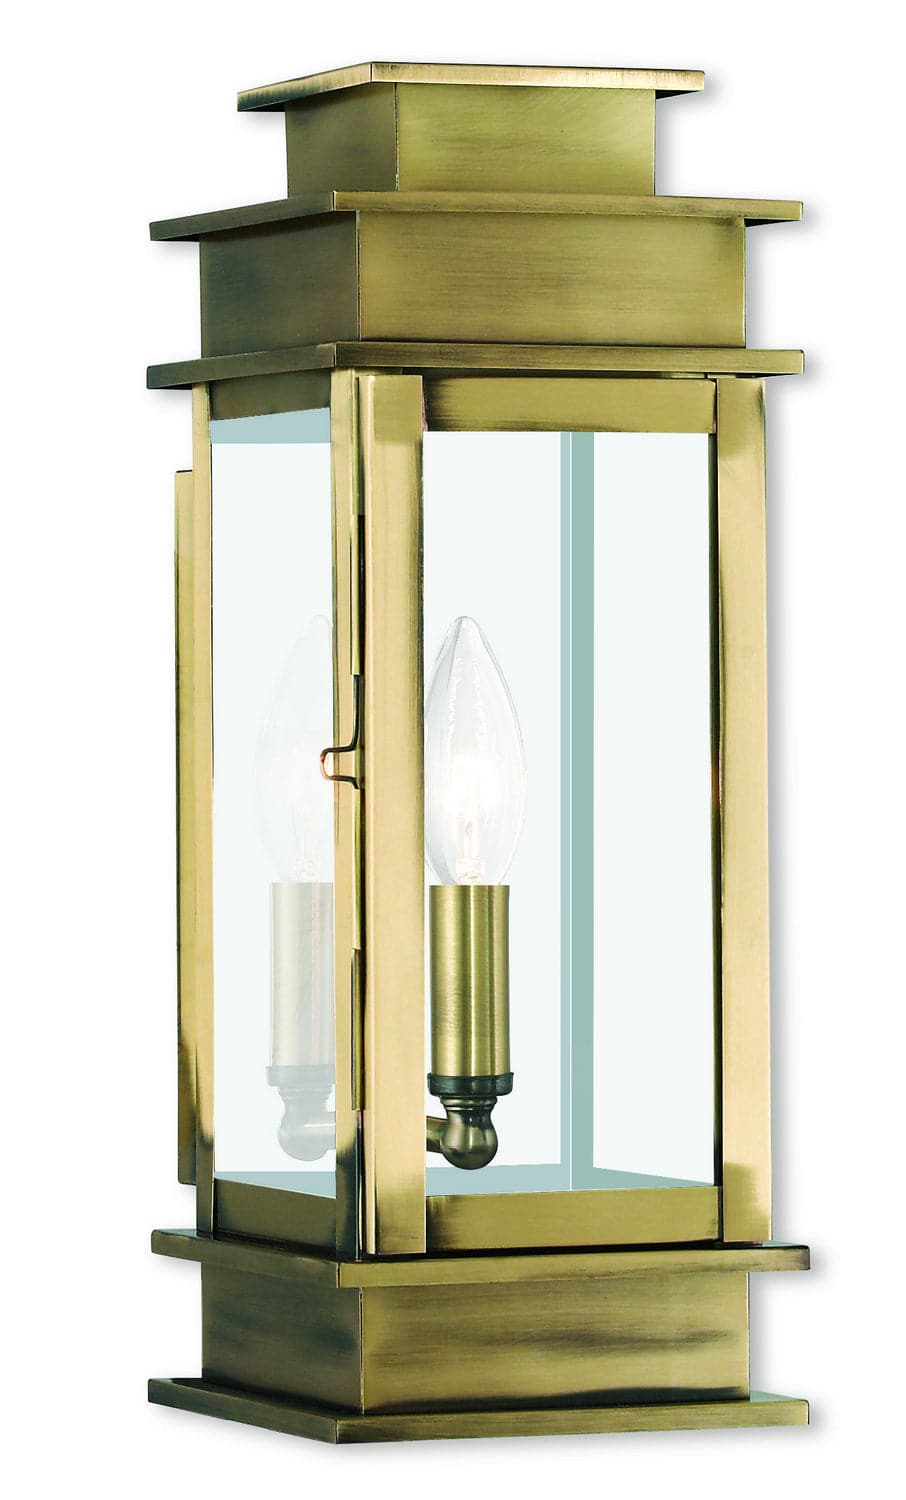 Livex Lighting - 2013-01 - One Light Outdoor Wall Lantern - Princeton - Antique Brass w/ Polished Chrome Stainless Steel